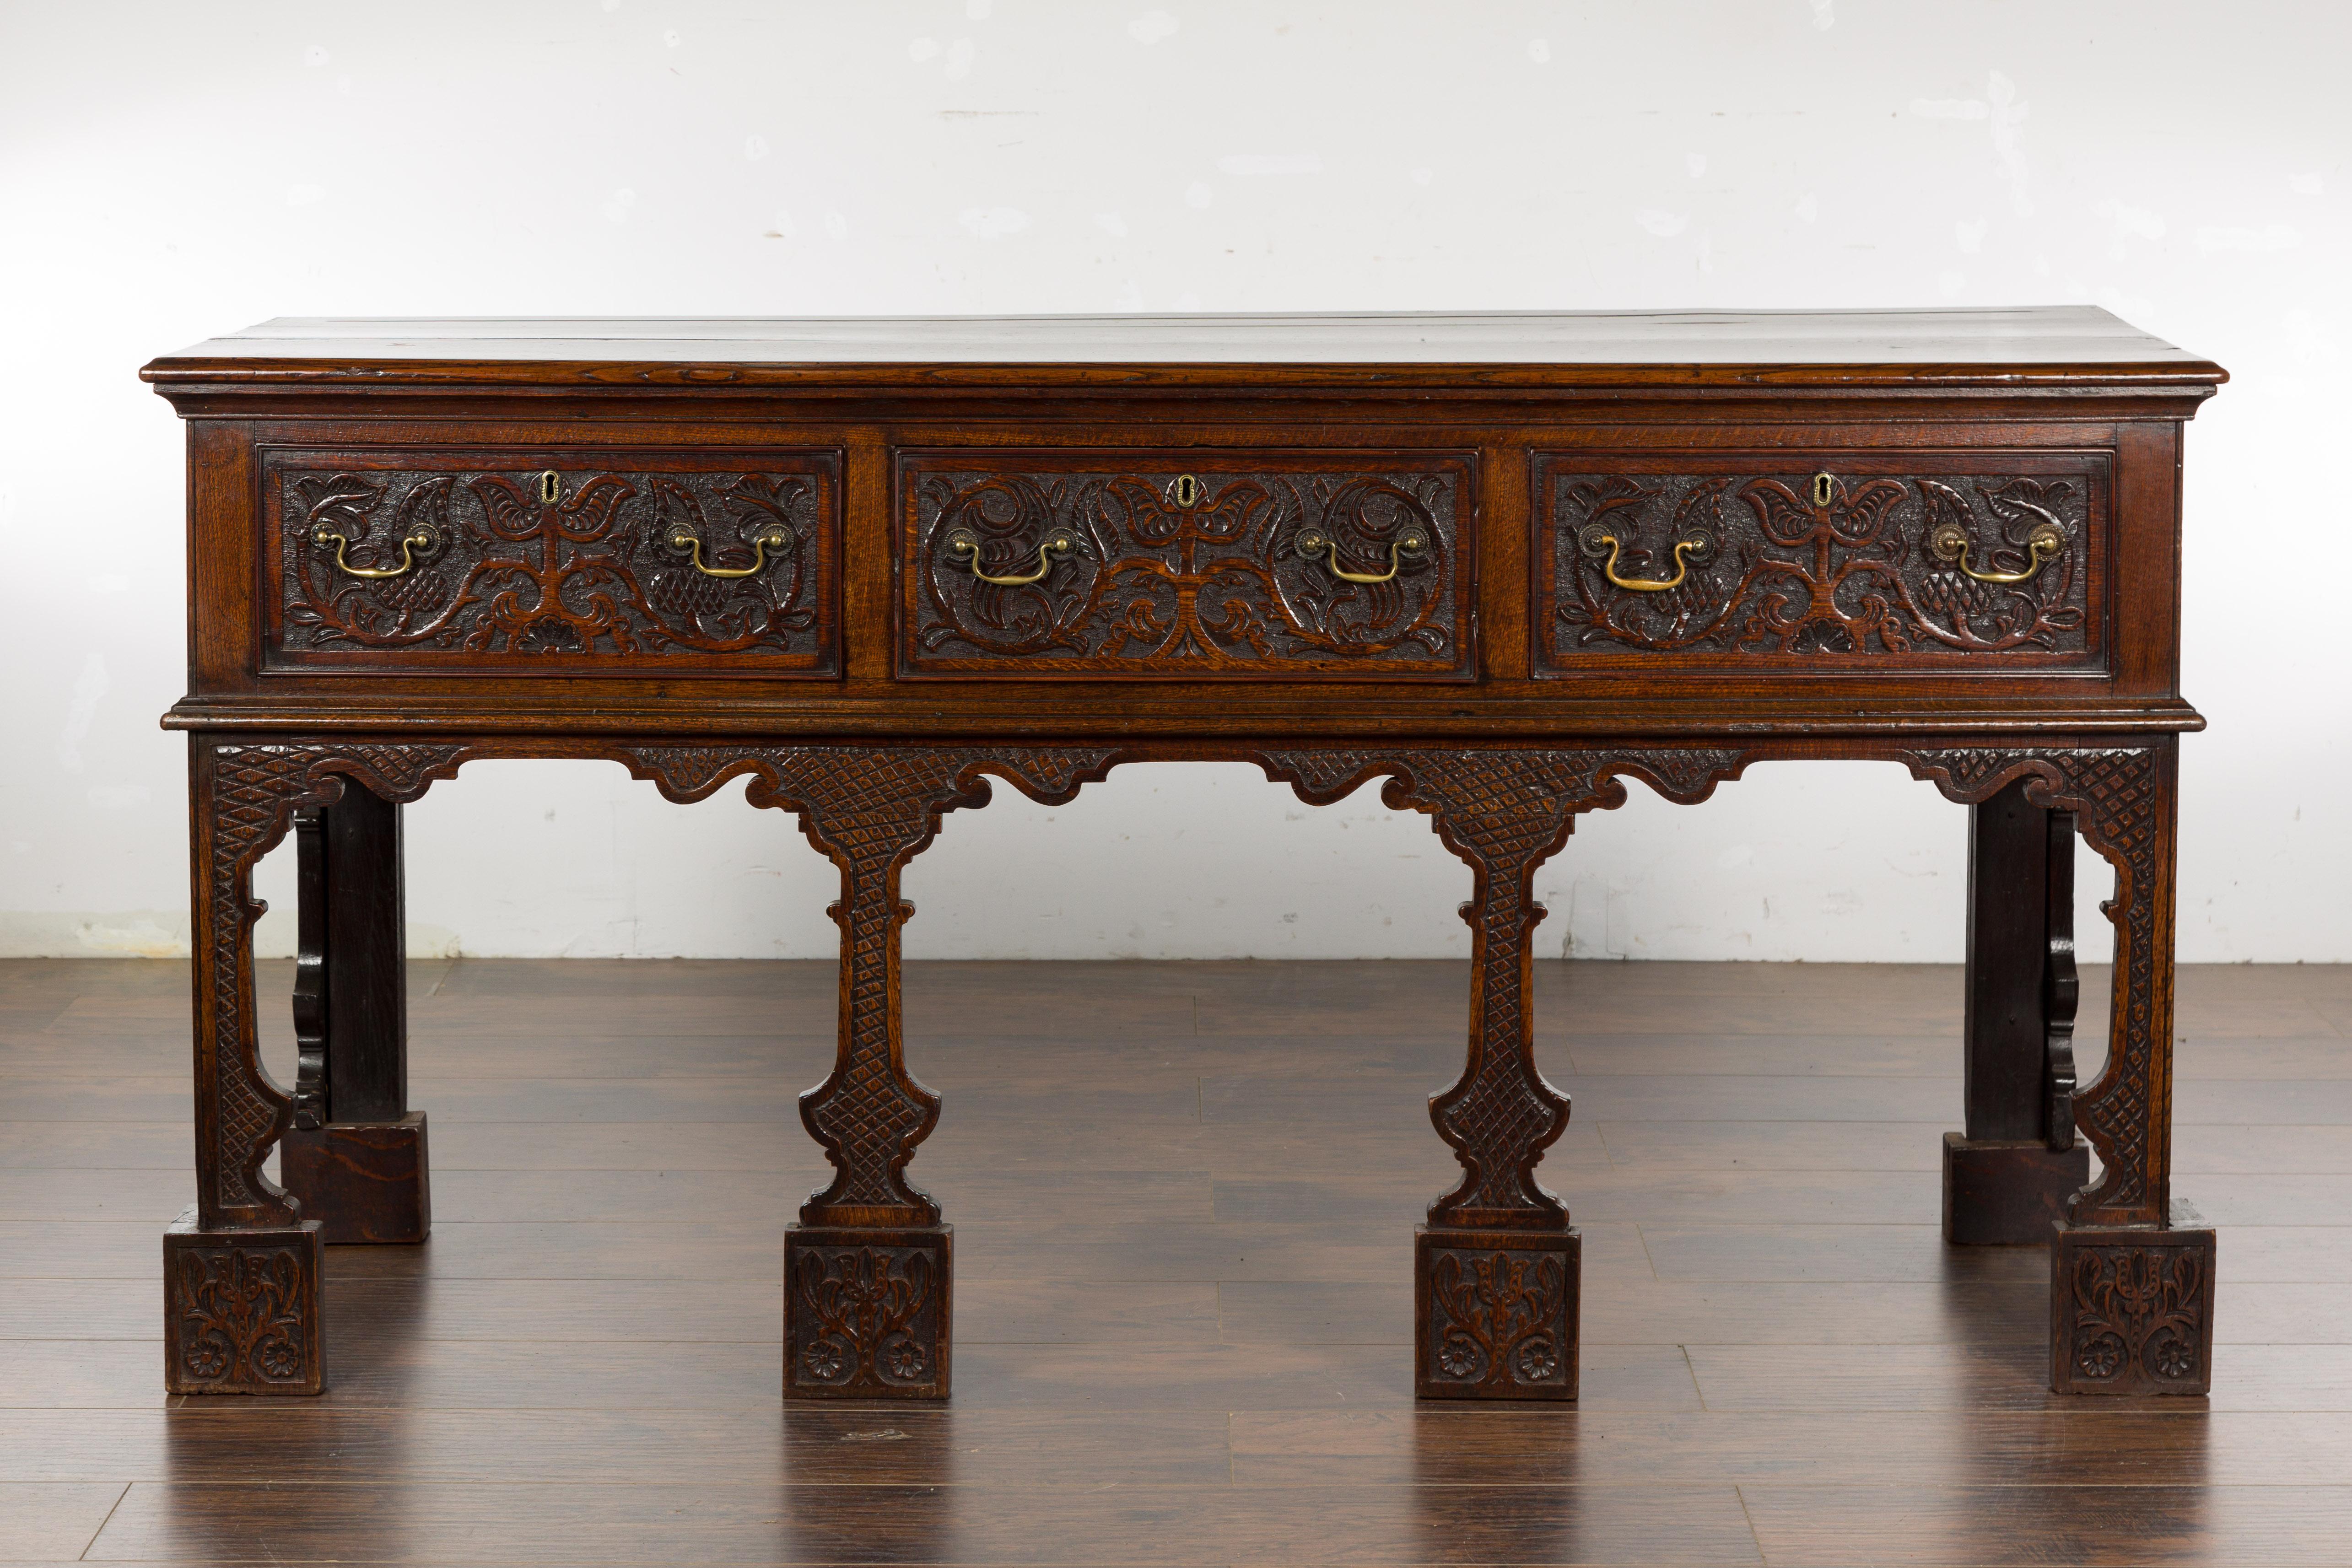 An English oak sideboard from the 19th century with three low-relief carved drawers, carved legs and brass hardware. Immerse yourself in the charm and splendor of the 19th century with this elegant English oak sideboard. This piece is crafted with